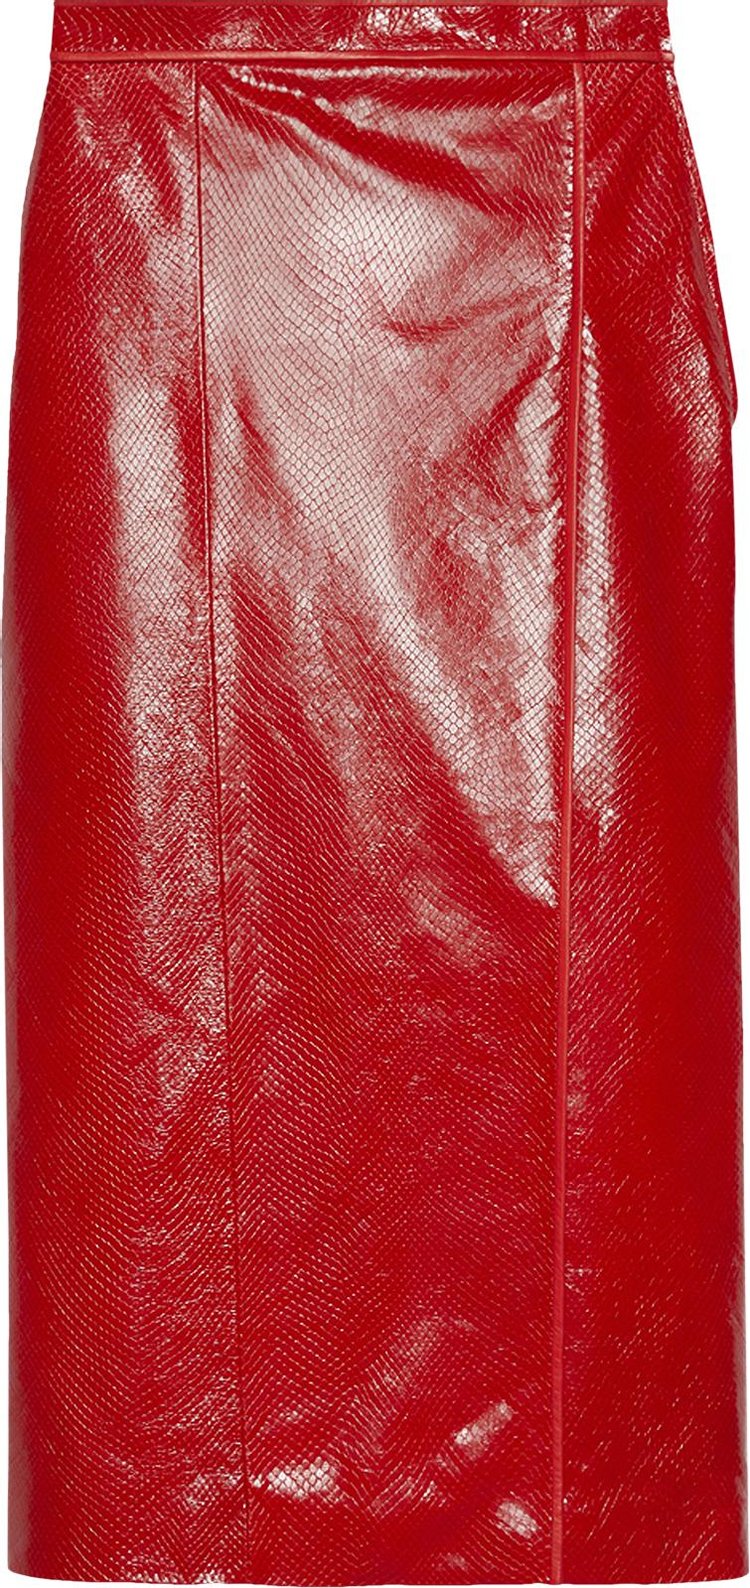 Gucci Python Print Leather Skirt 'Red'